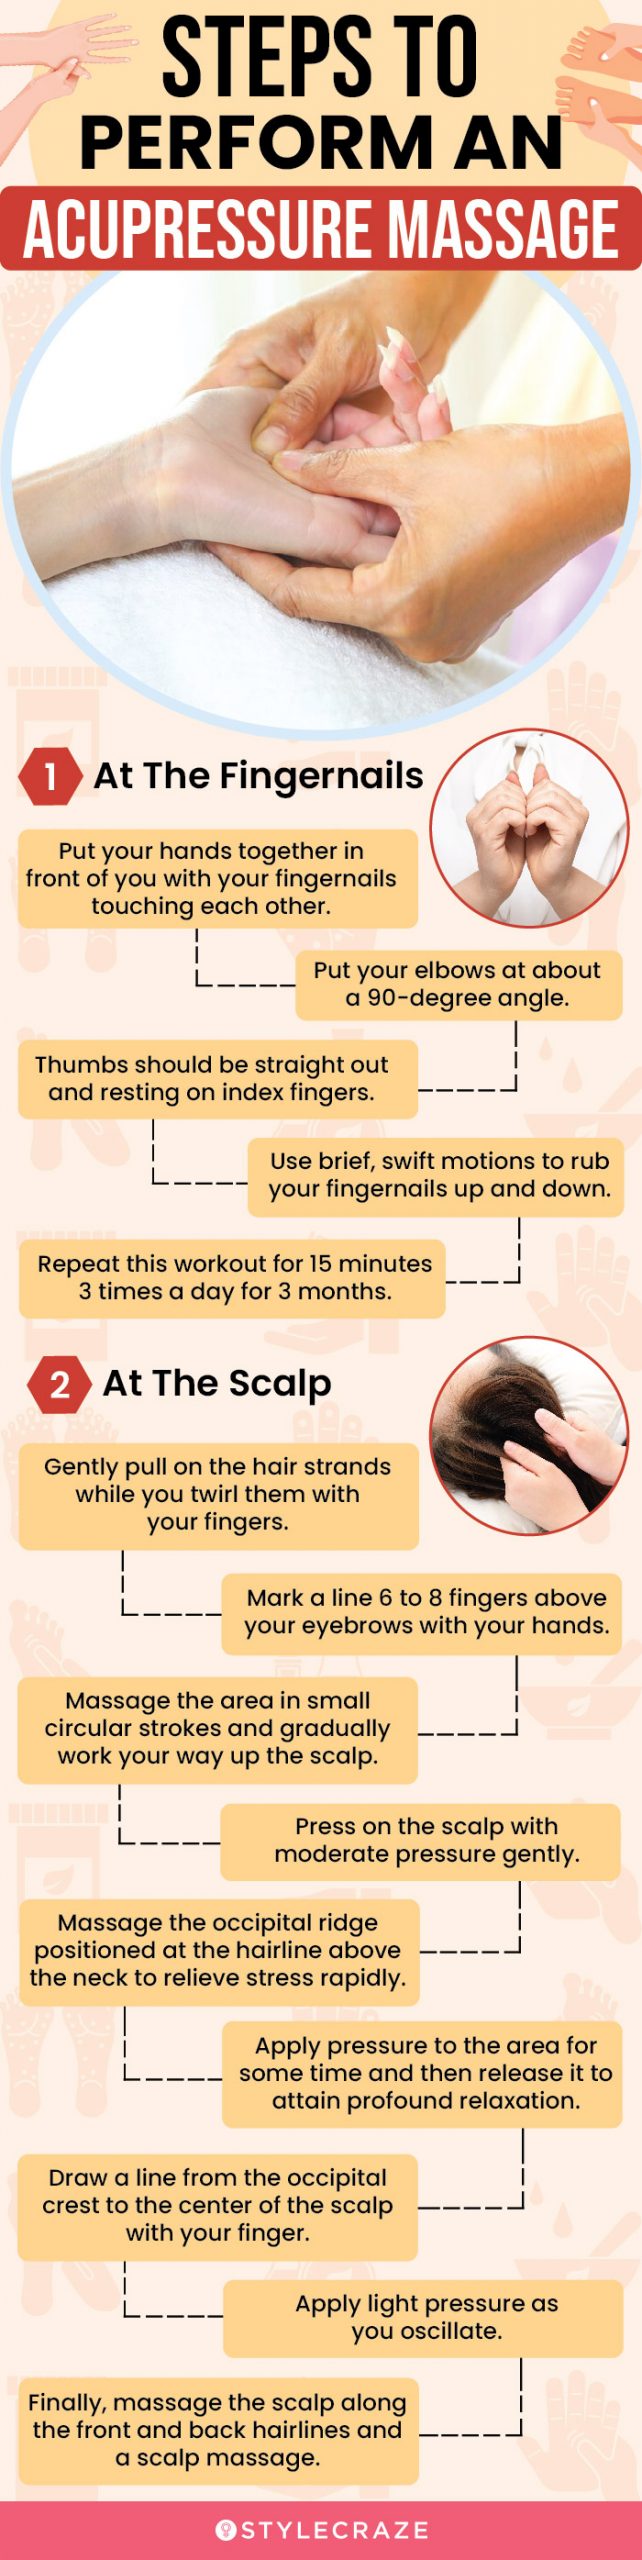 steps to perform an acupressure massage [infographic]